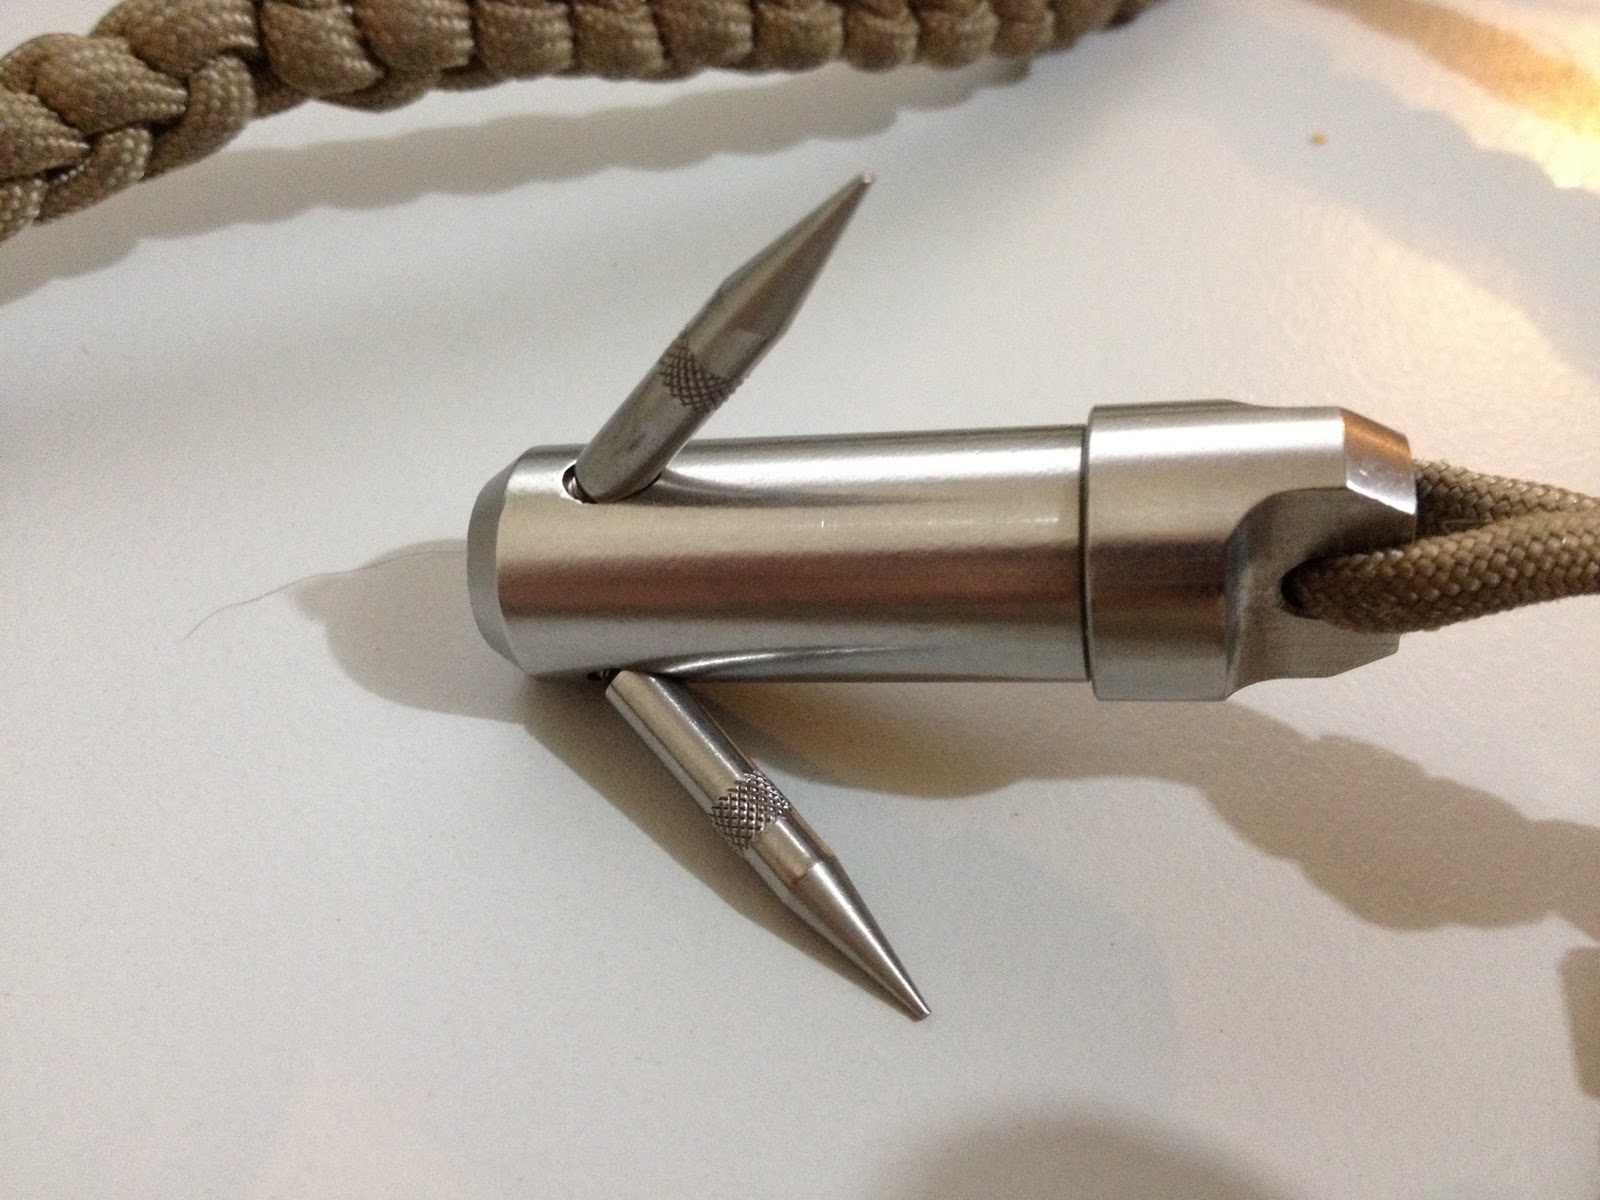 ApocalypseEquipped: Review: CountyComm Micro Grappling hook